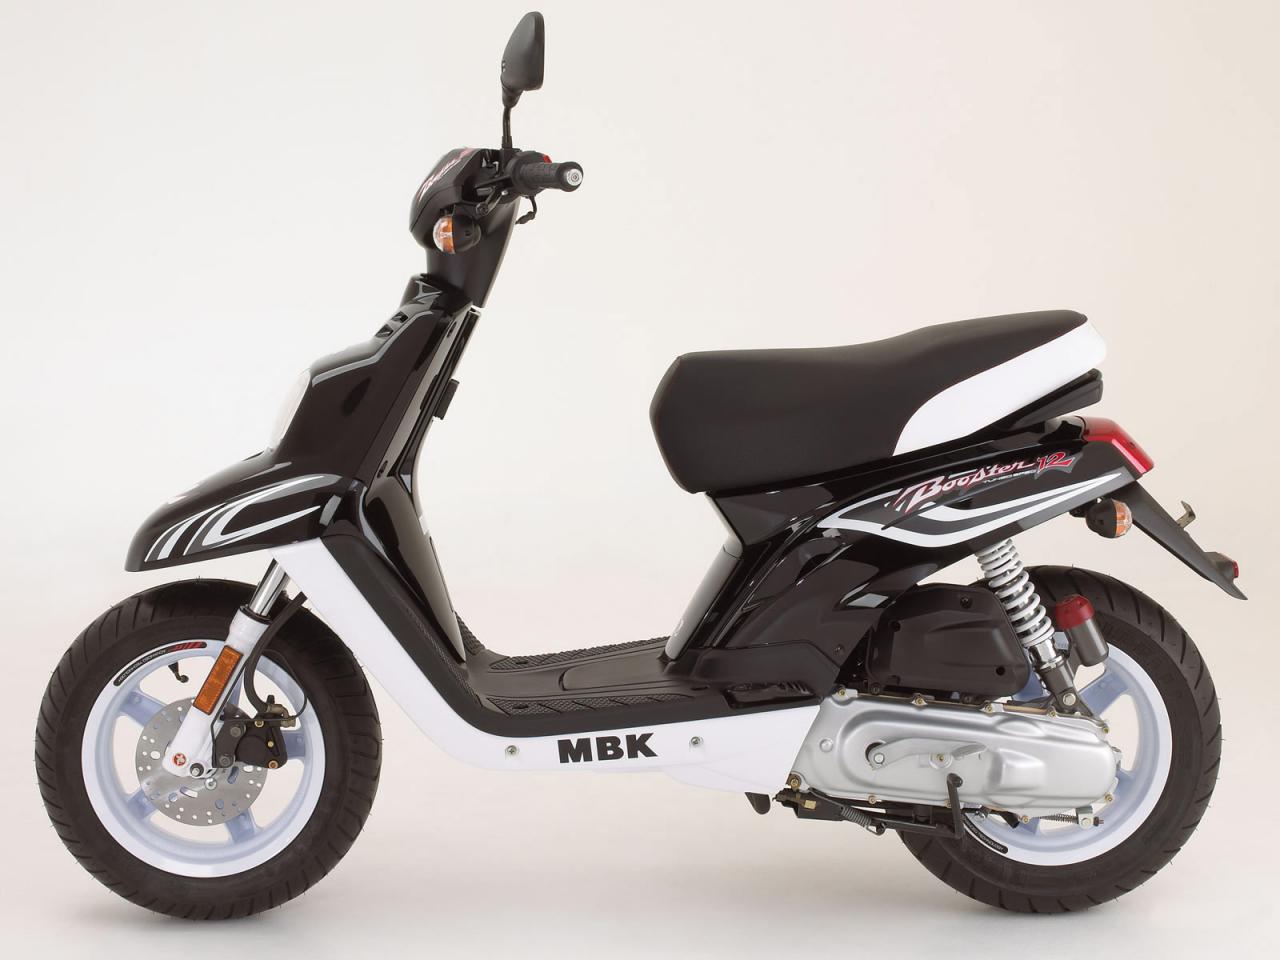 2009 MBK Booster 12inch Naked Scooter pictures, specifications